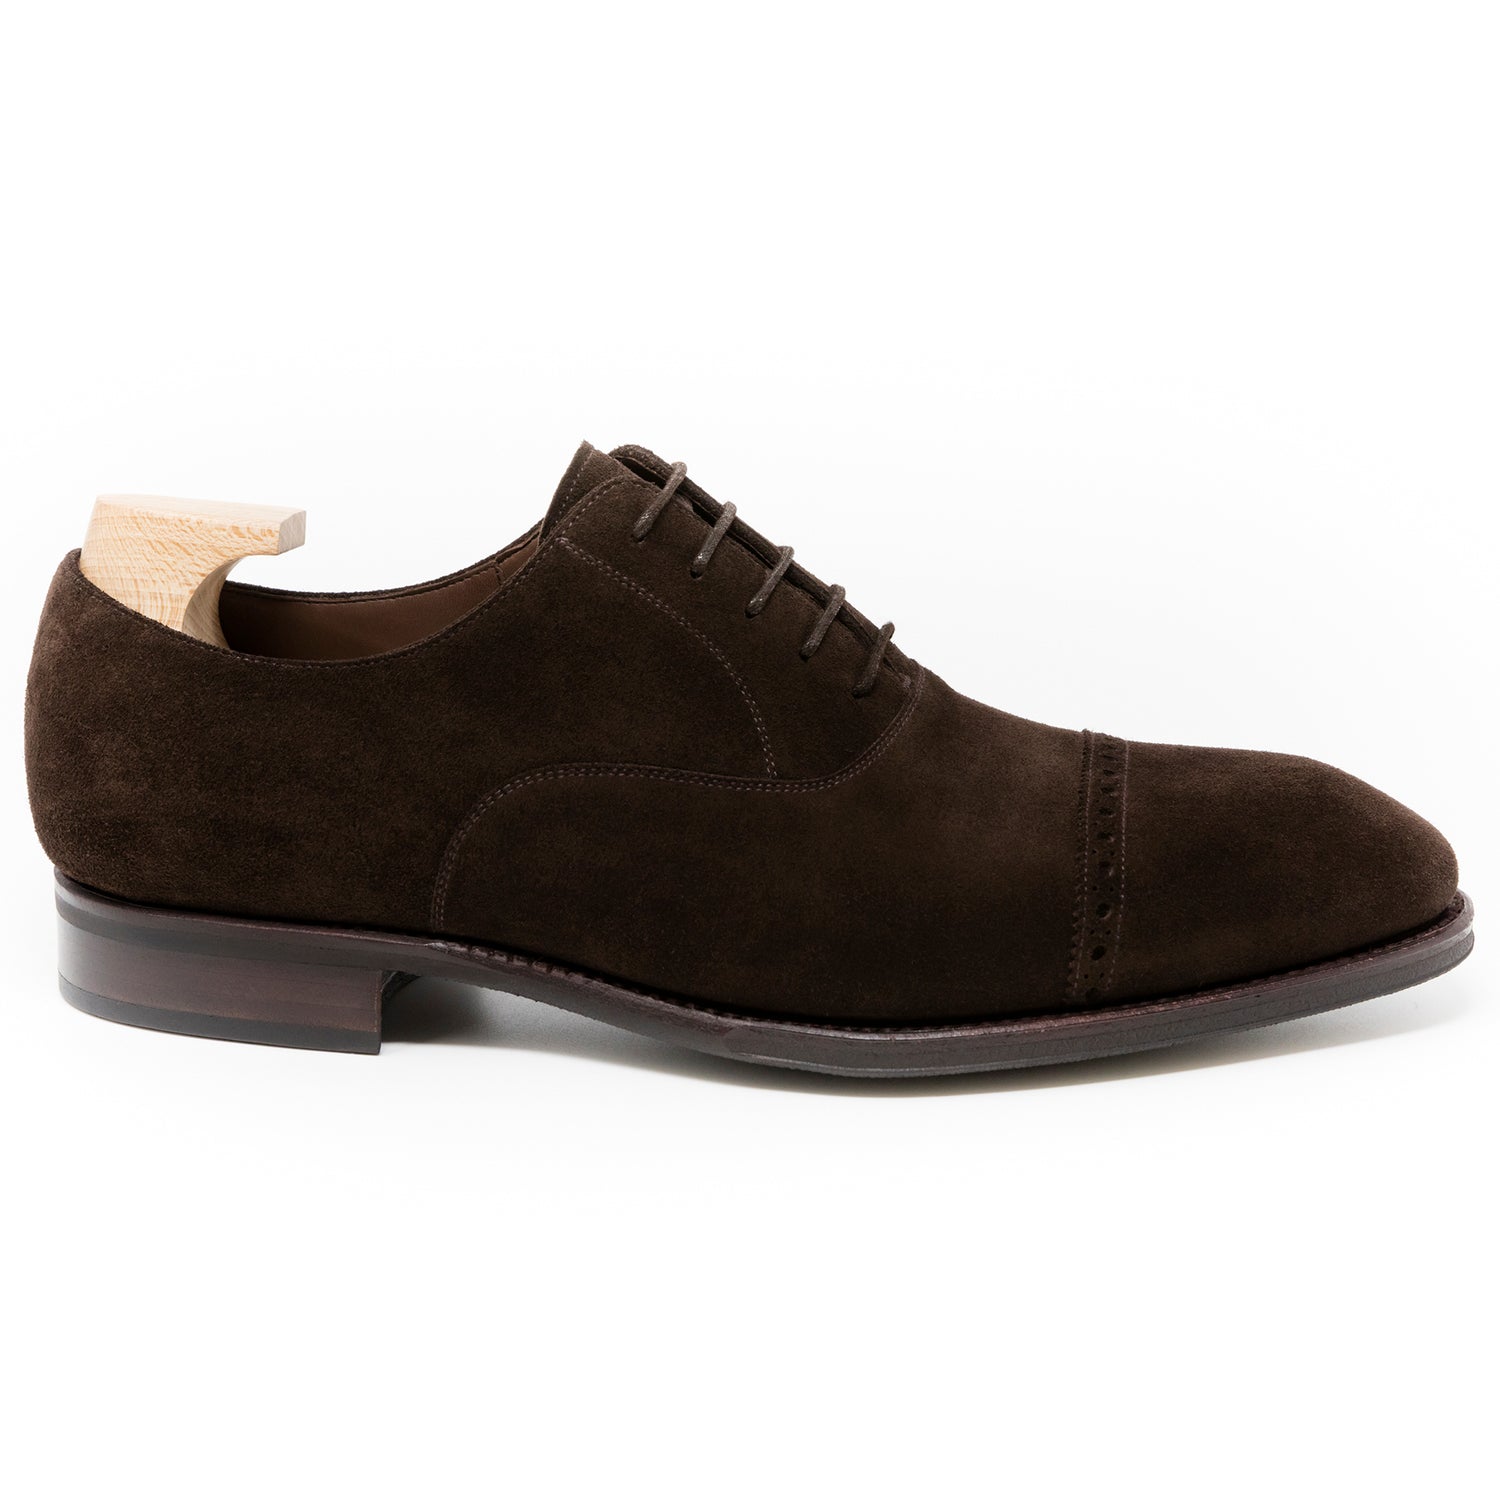 TLB Mallorca leather shoes 503 / ALAN / SUEDE BROWN